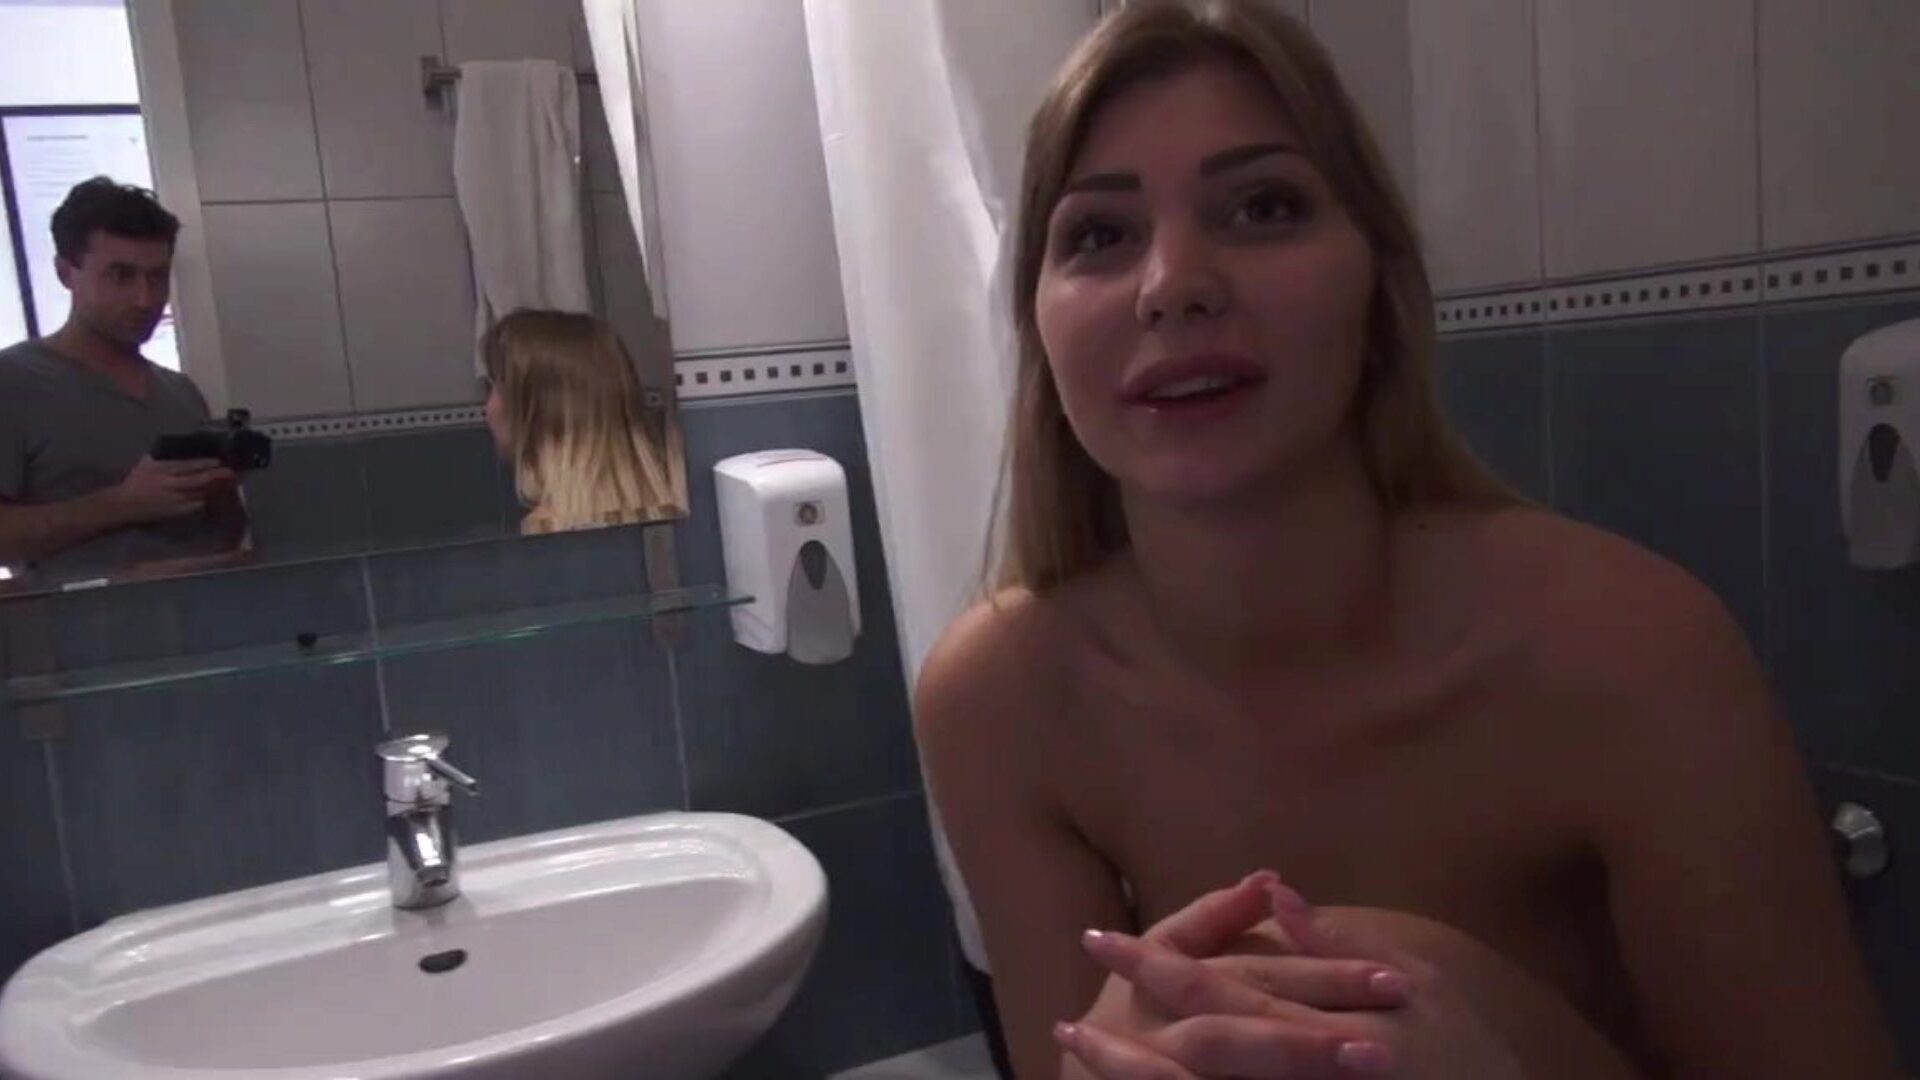 DTFsluts - BLONDE SMALL TITS AMATEUR HALEY HILL POUNDED IN RESTROOM BY JAMES DEEN